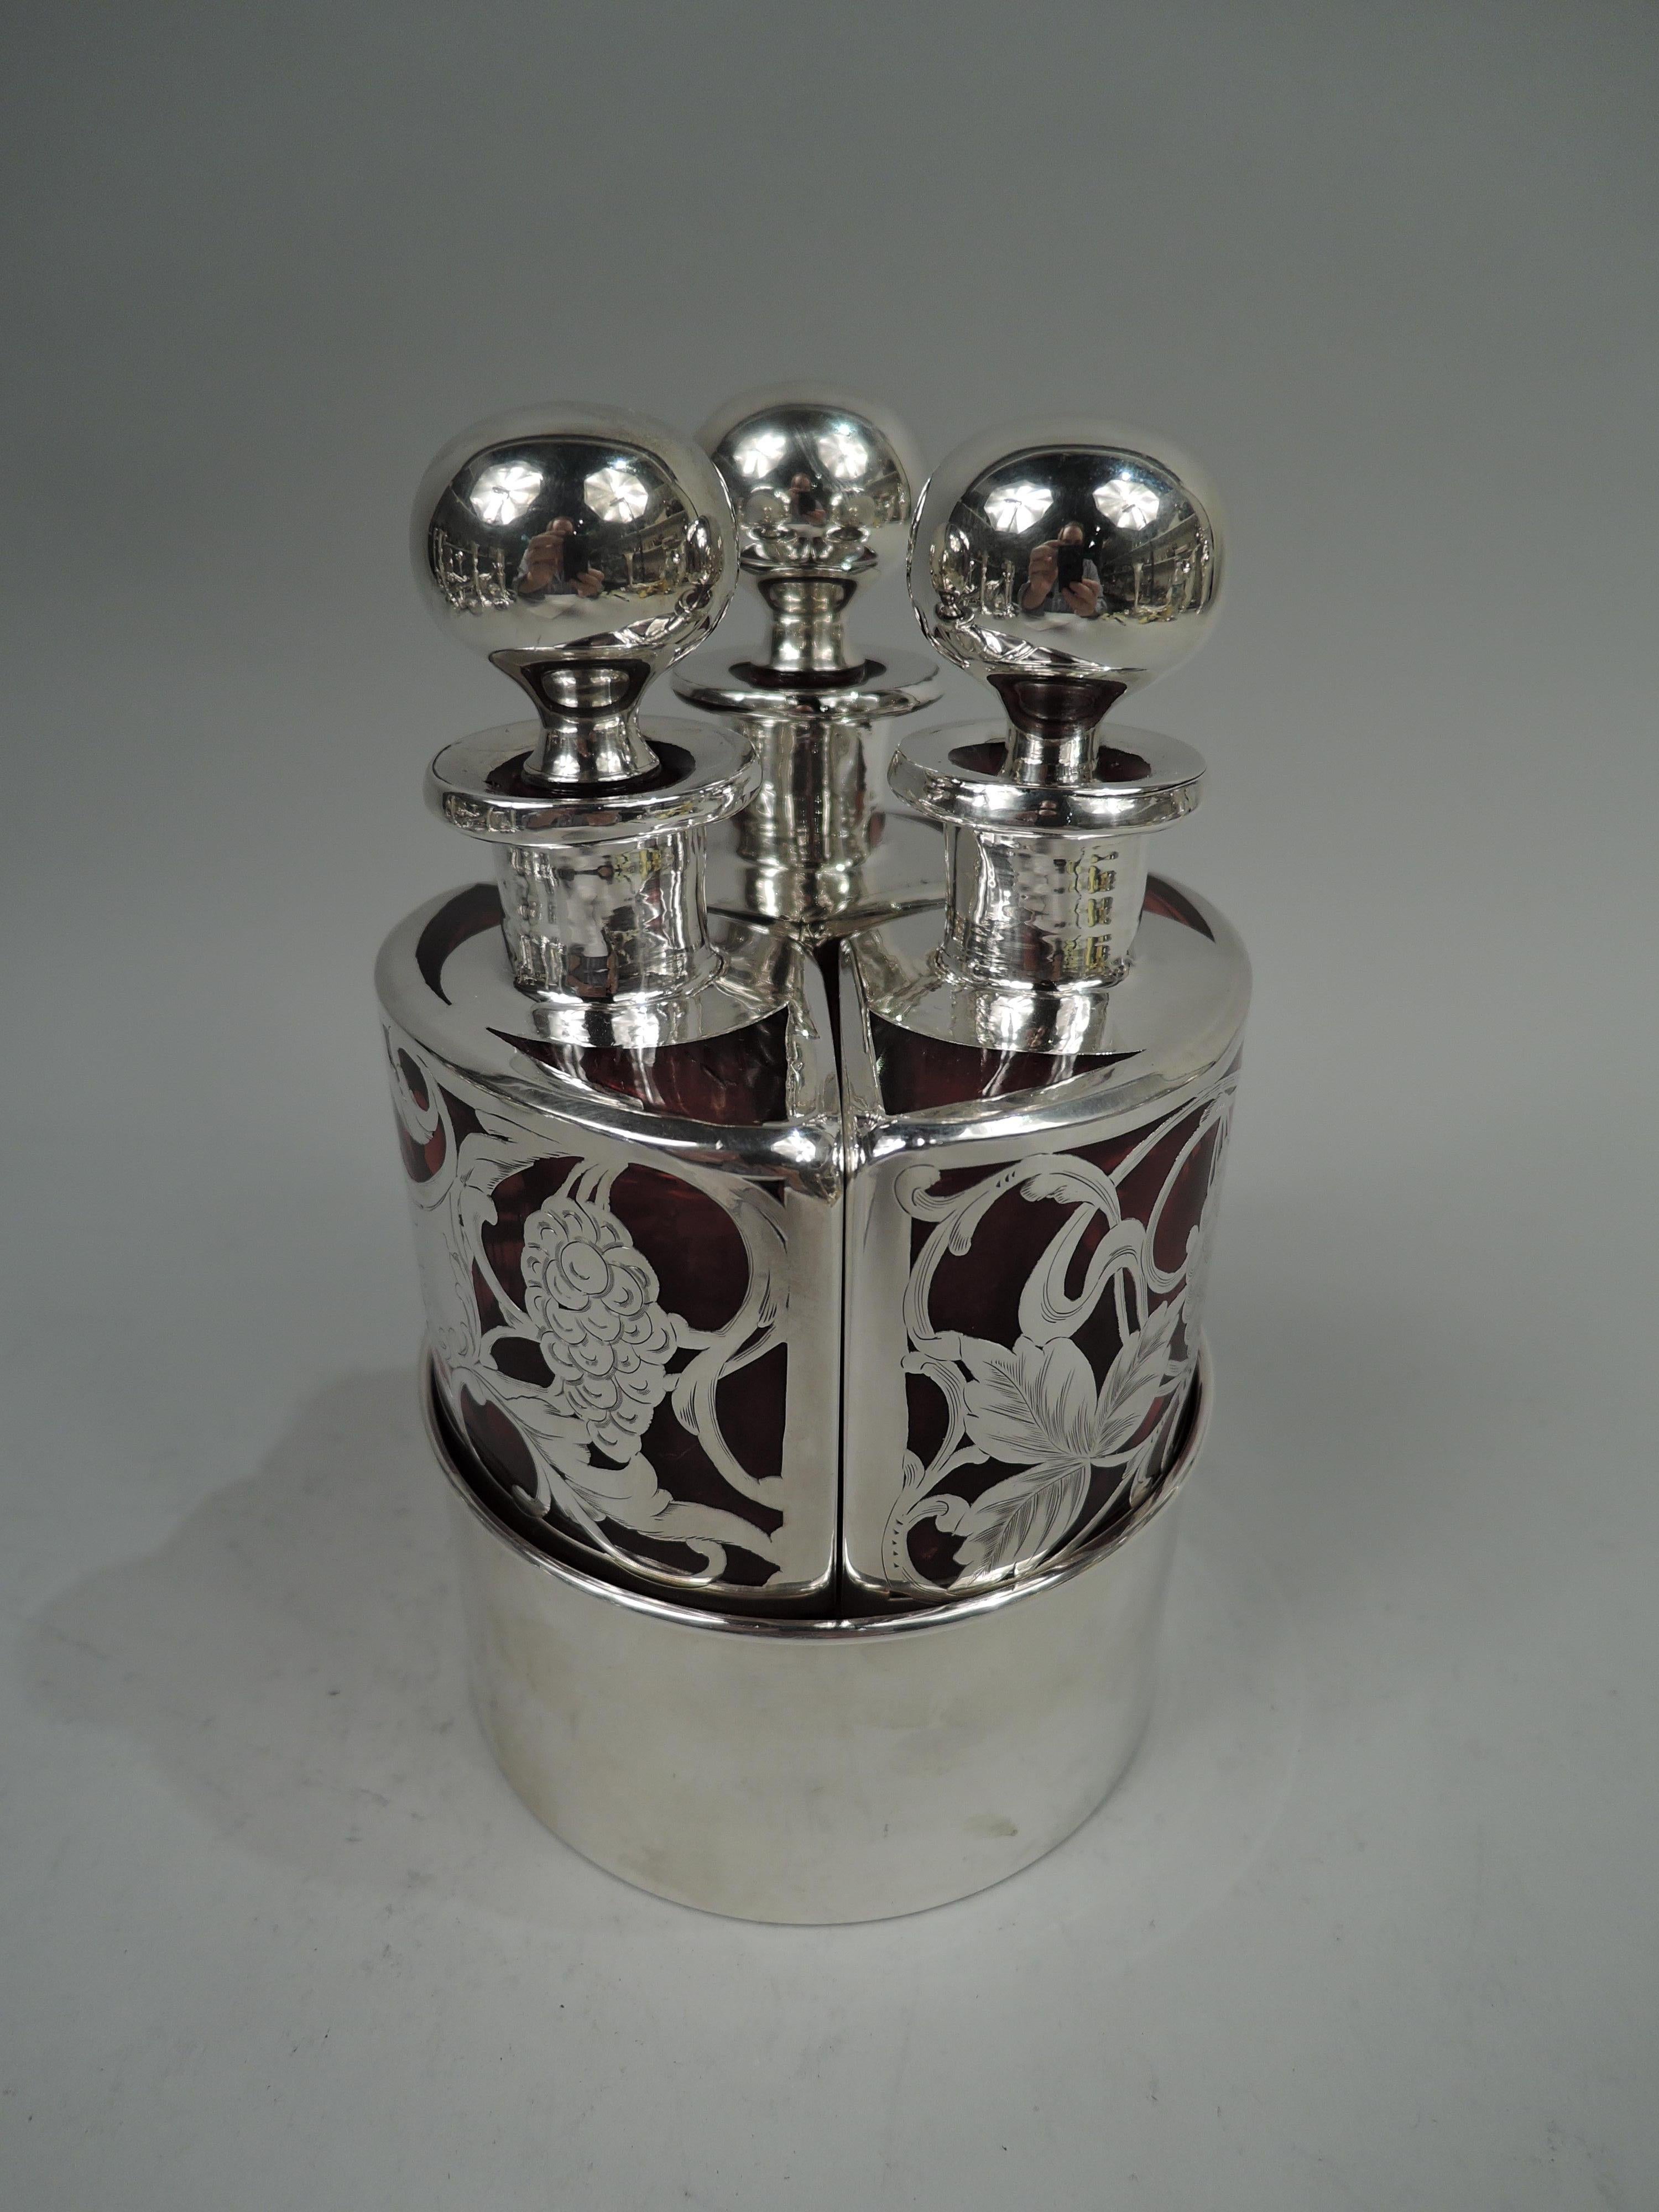 Art Nouveau glass perfume bottle set with engraved silver overlay. Made by Mauser in New York, ca 1900. Three triangular bottles each with curved back in sterling silver ring, forming an elegant geometry lesson. Short neck with everted rim in silver